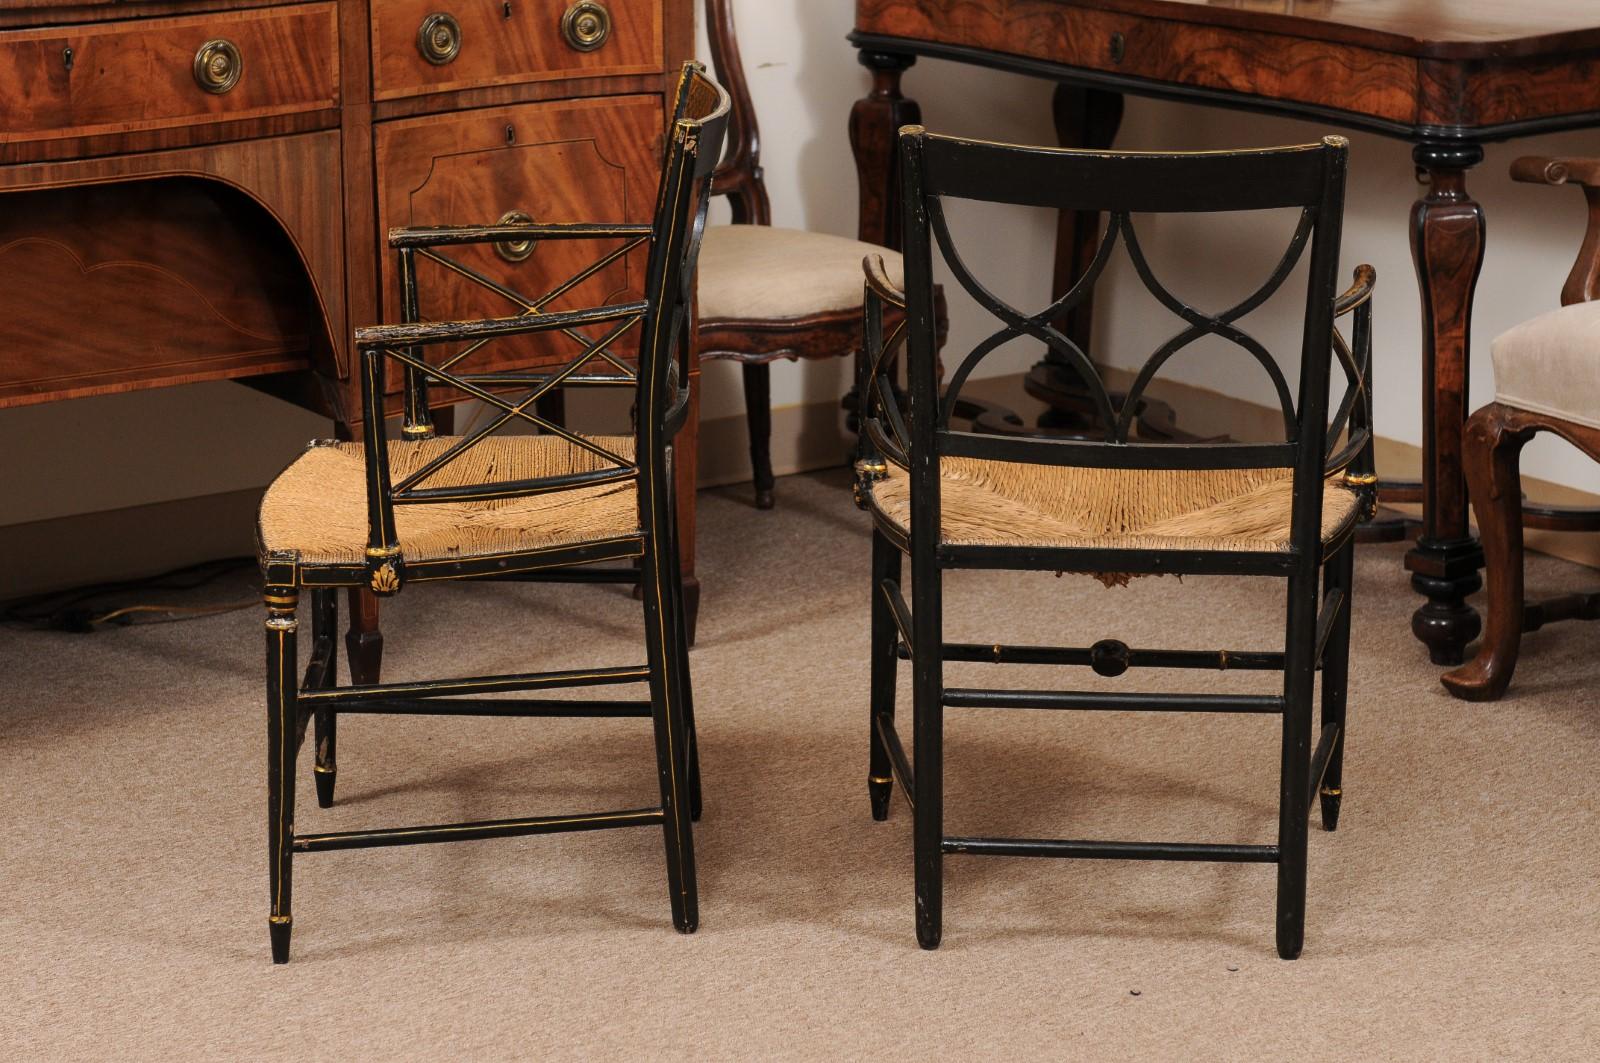  Pair of Regency Black Painted Arm Chairs with Floral Decoration & Rush Seats For Sale 3